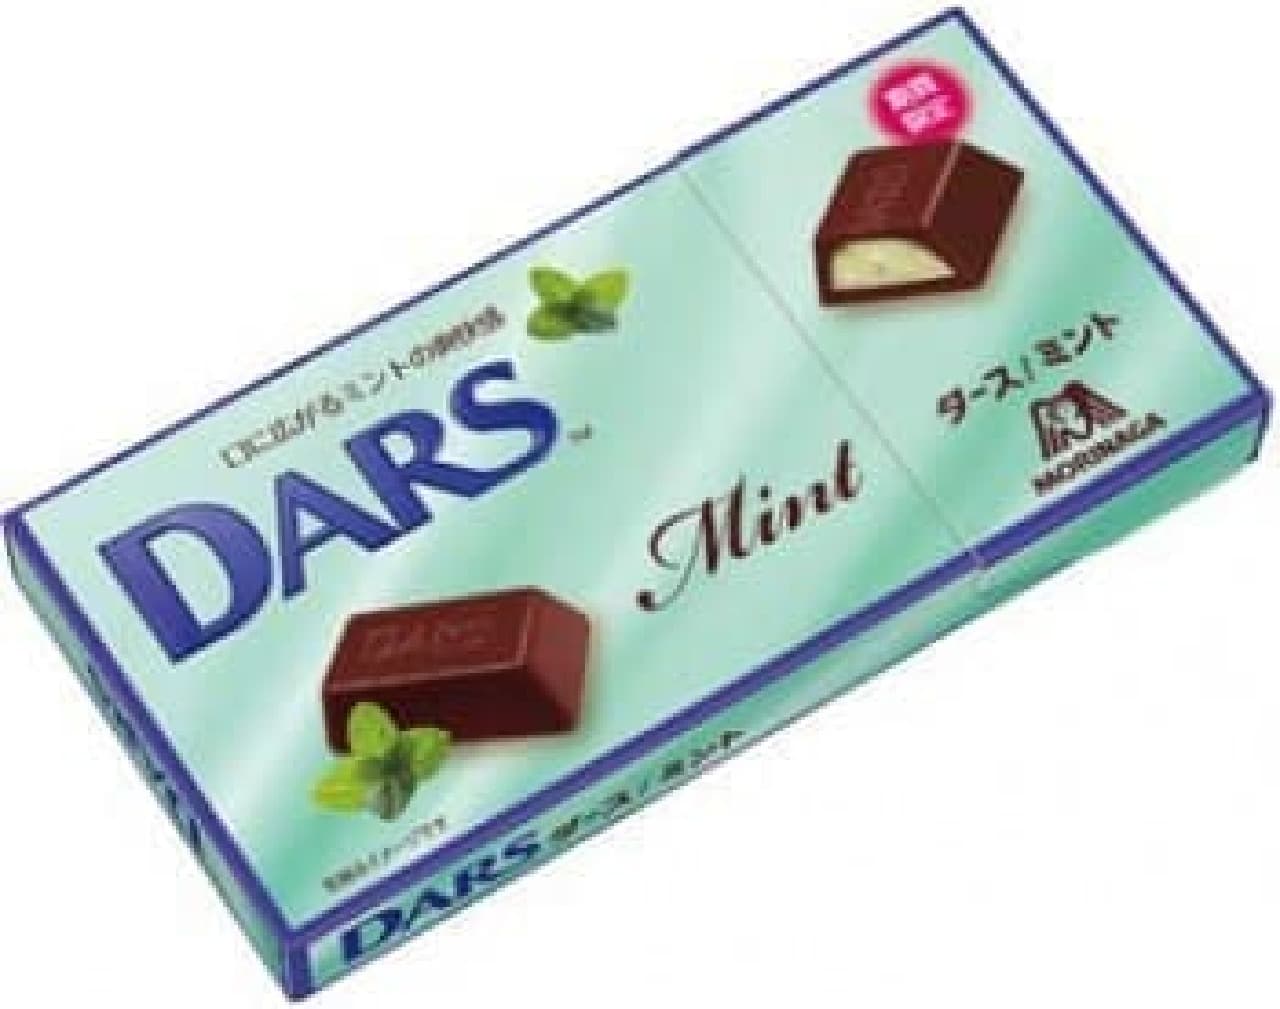 A refreshing dozen with mint chocolate